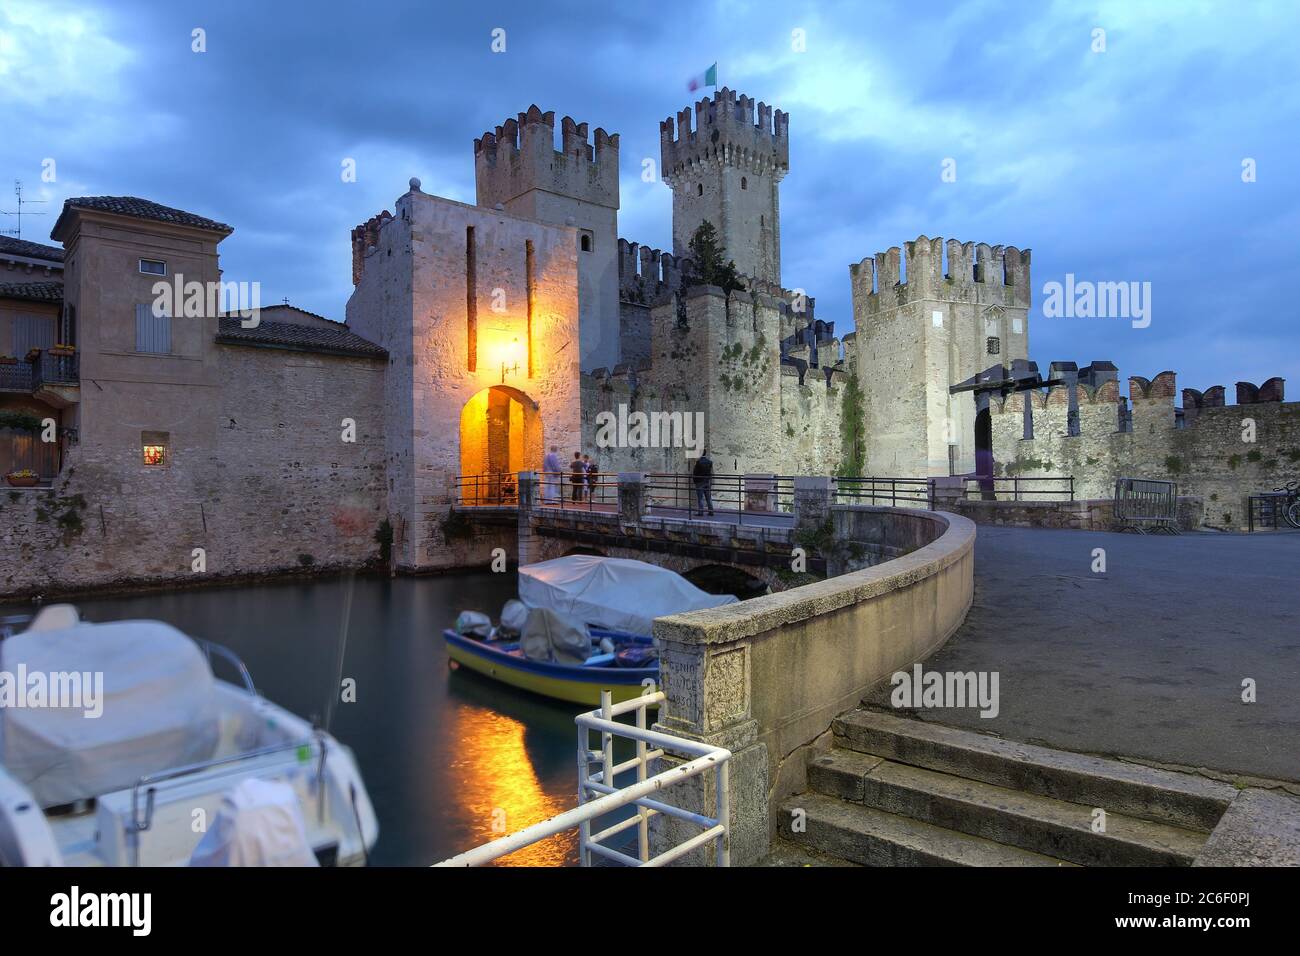 Night scene of Scaliger Castle, an old fortification guarding the entrance in Sirmione on Lake Garda, Italy Stock Photo